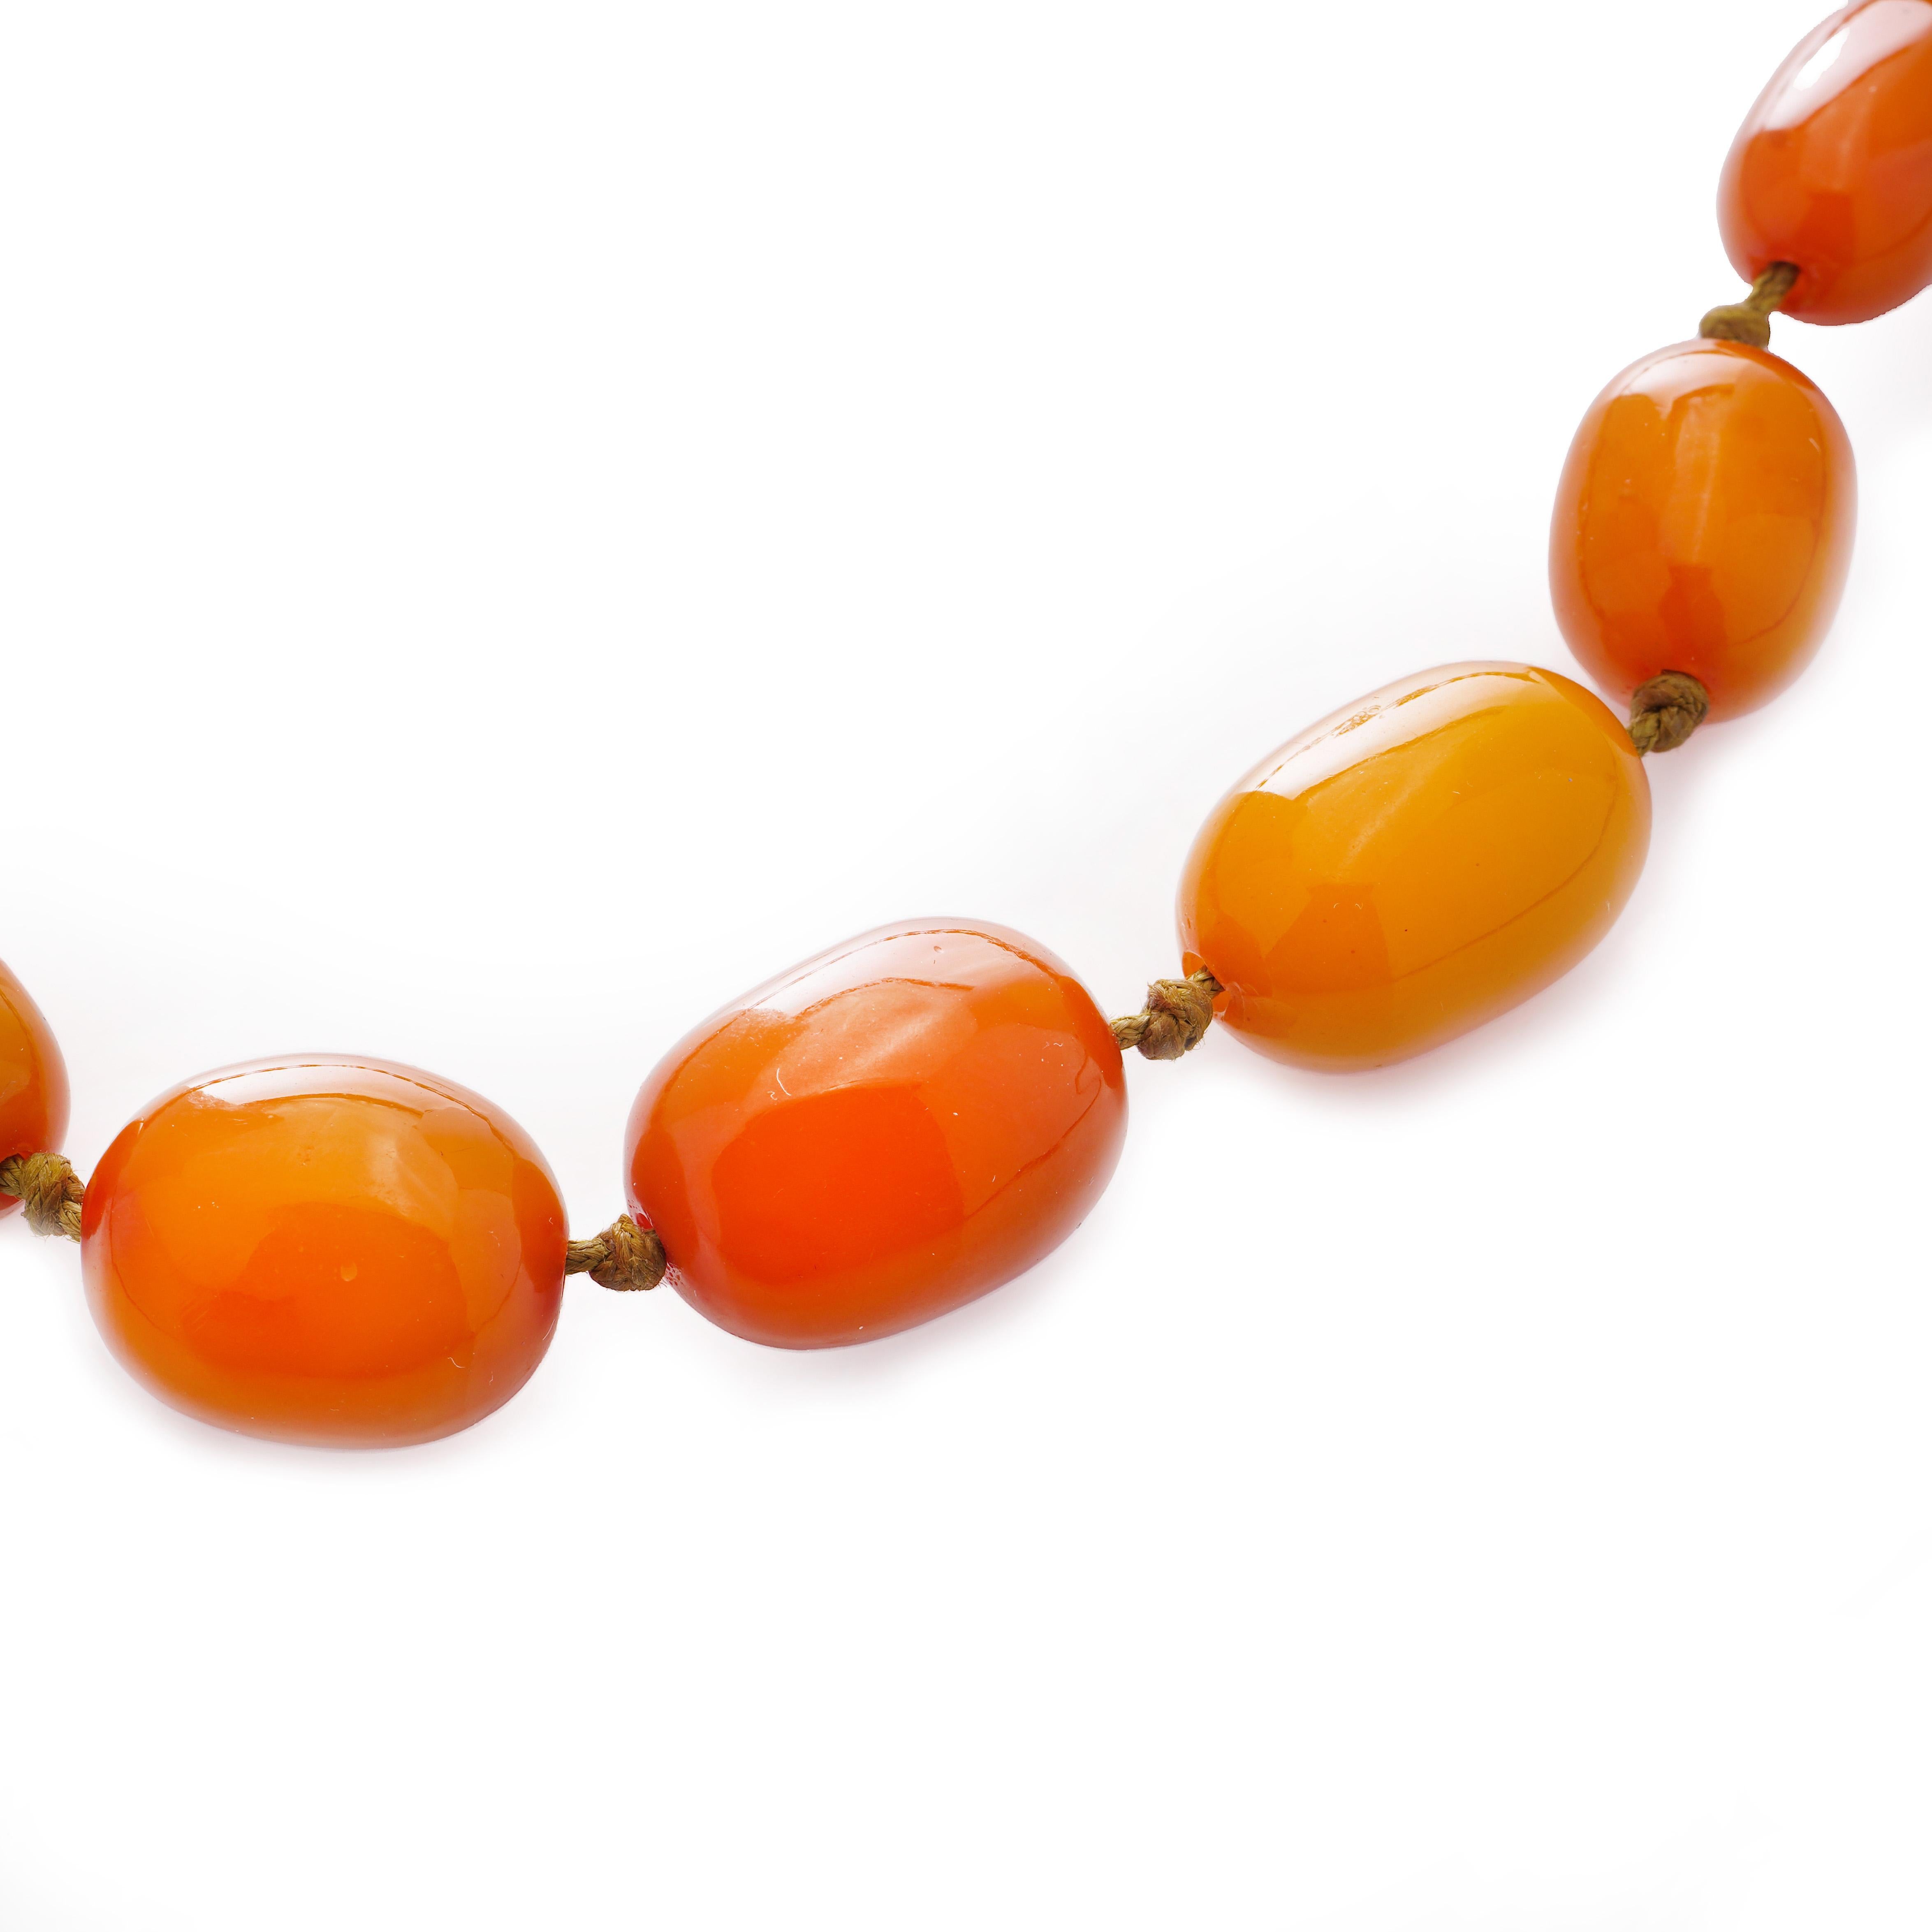 Vintage Natural Baltic Amber bead necklace.

Natural Baltic amber, sourced from Baltic states, Ca, 1950's
The necklace is made of 27 various sizes of amber beads.
The length of the necklace: 48 cm
The necklace has a gold plated clasp.
The